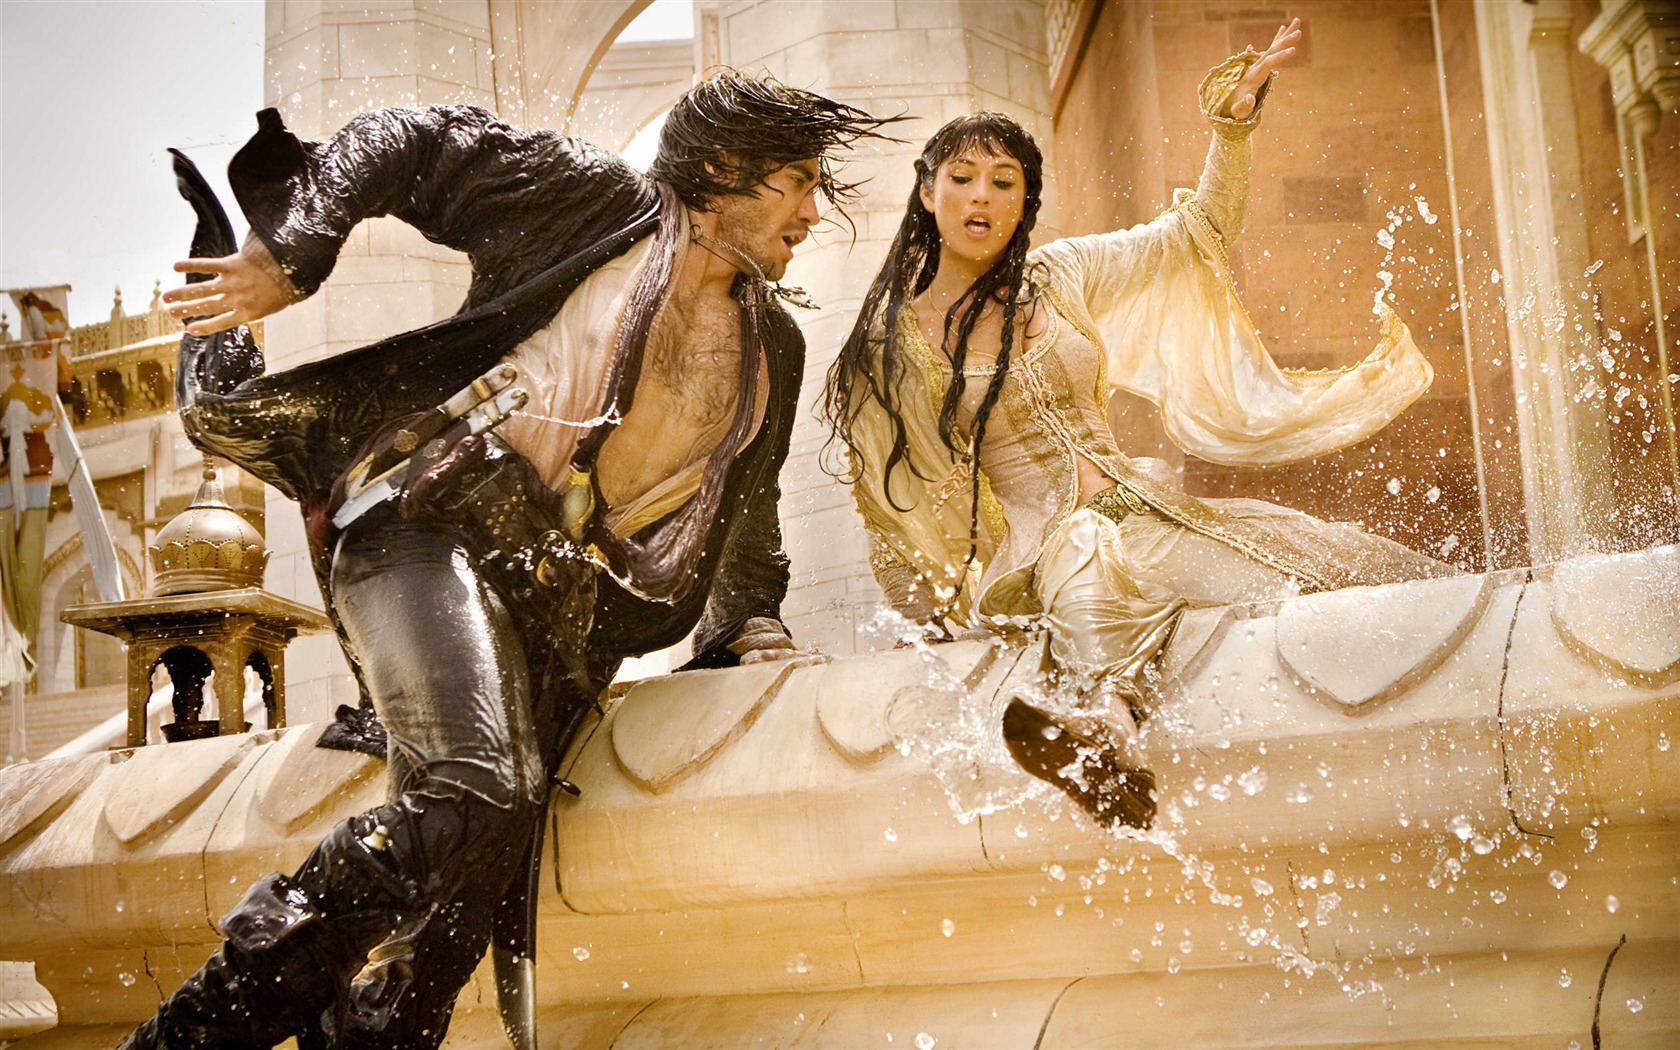 Prince of Persia The Sands of Time 波斯王子：時之刃 #4 - 1680x1050